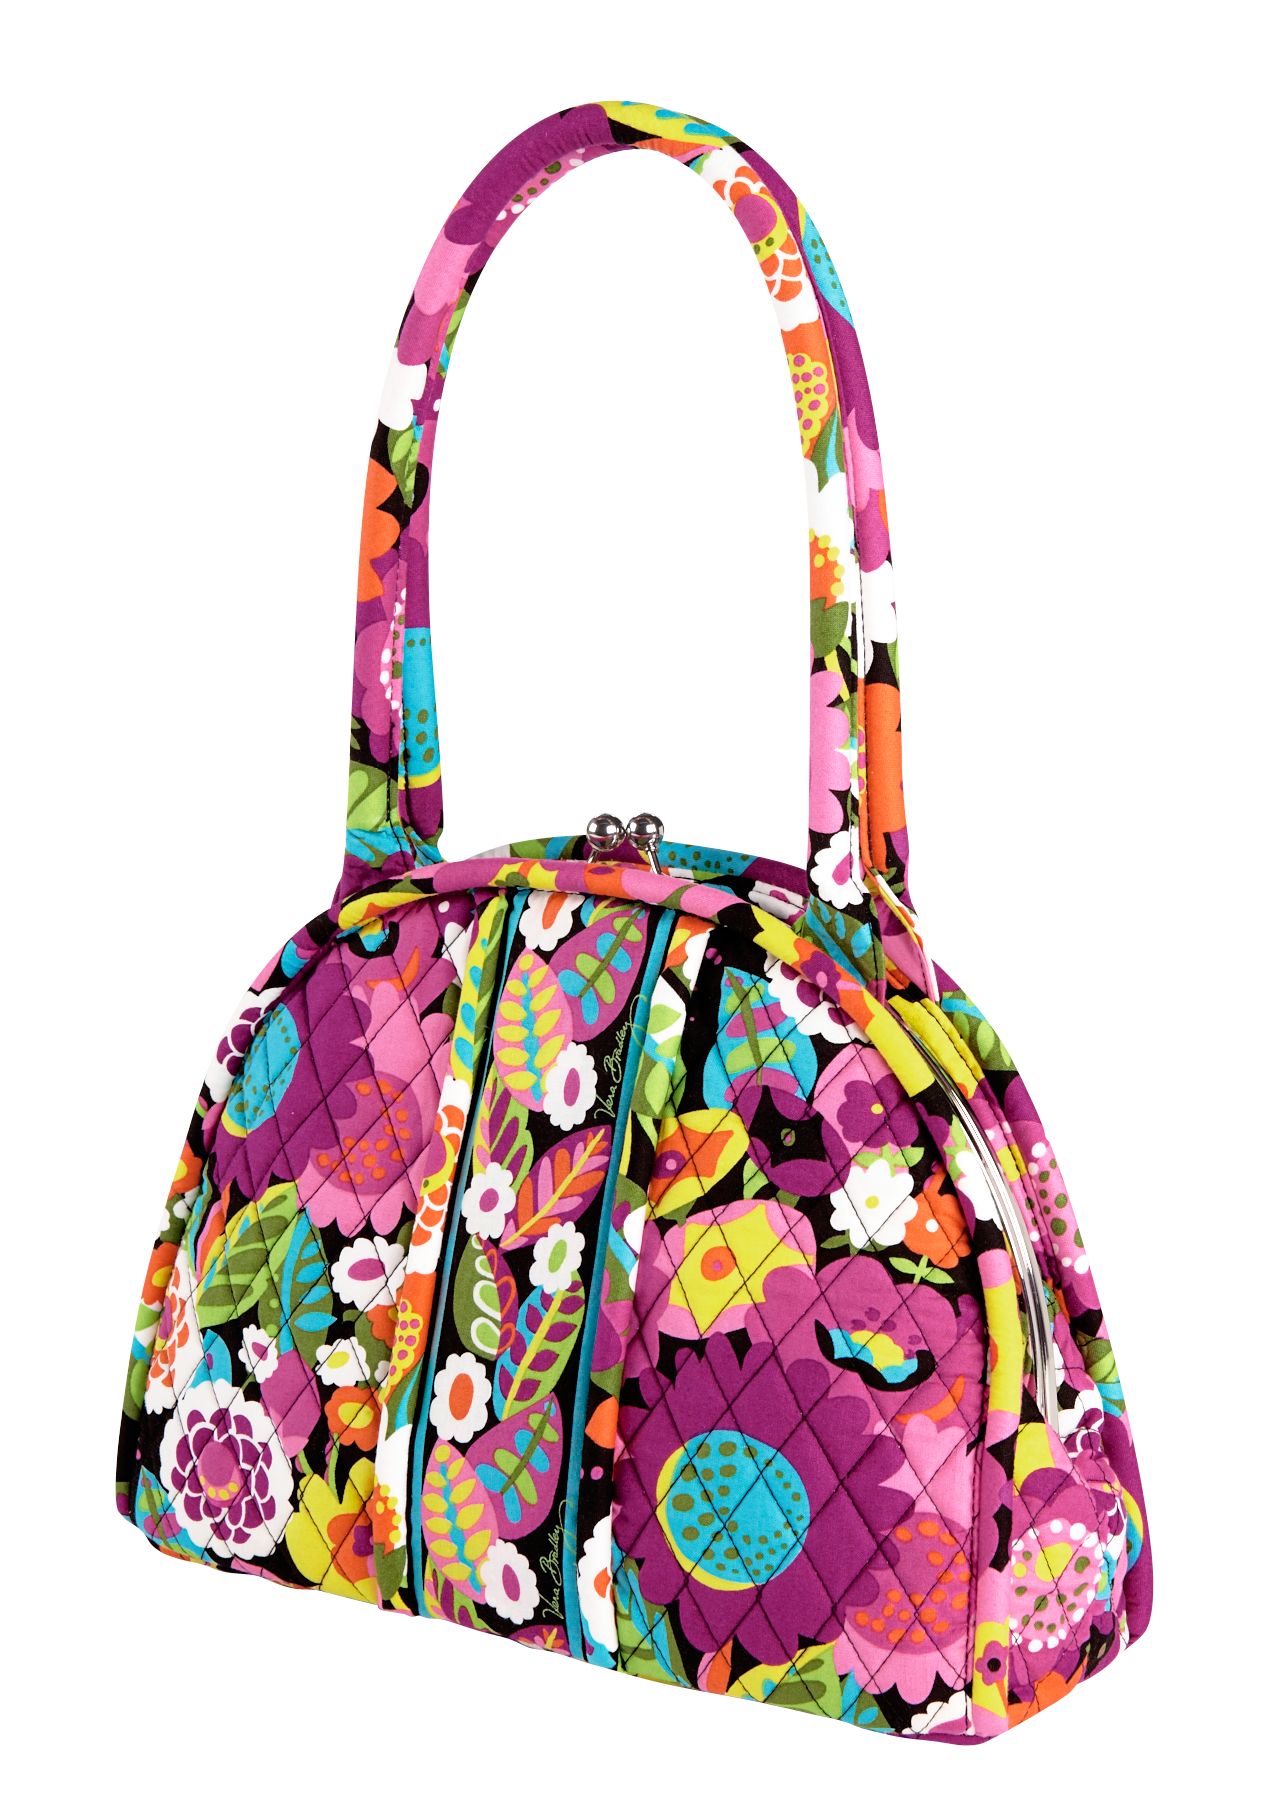 Vera Bradley,Get an extra 20% off when you buy 3 or more Online ...